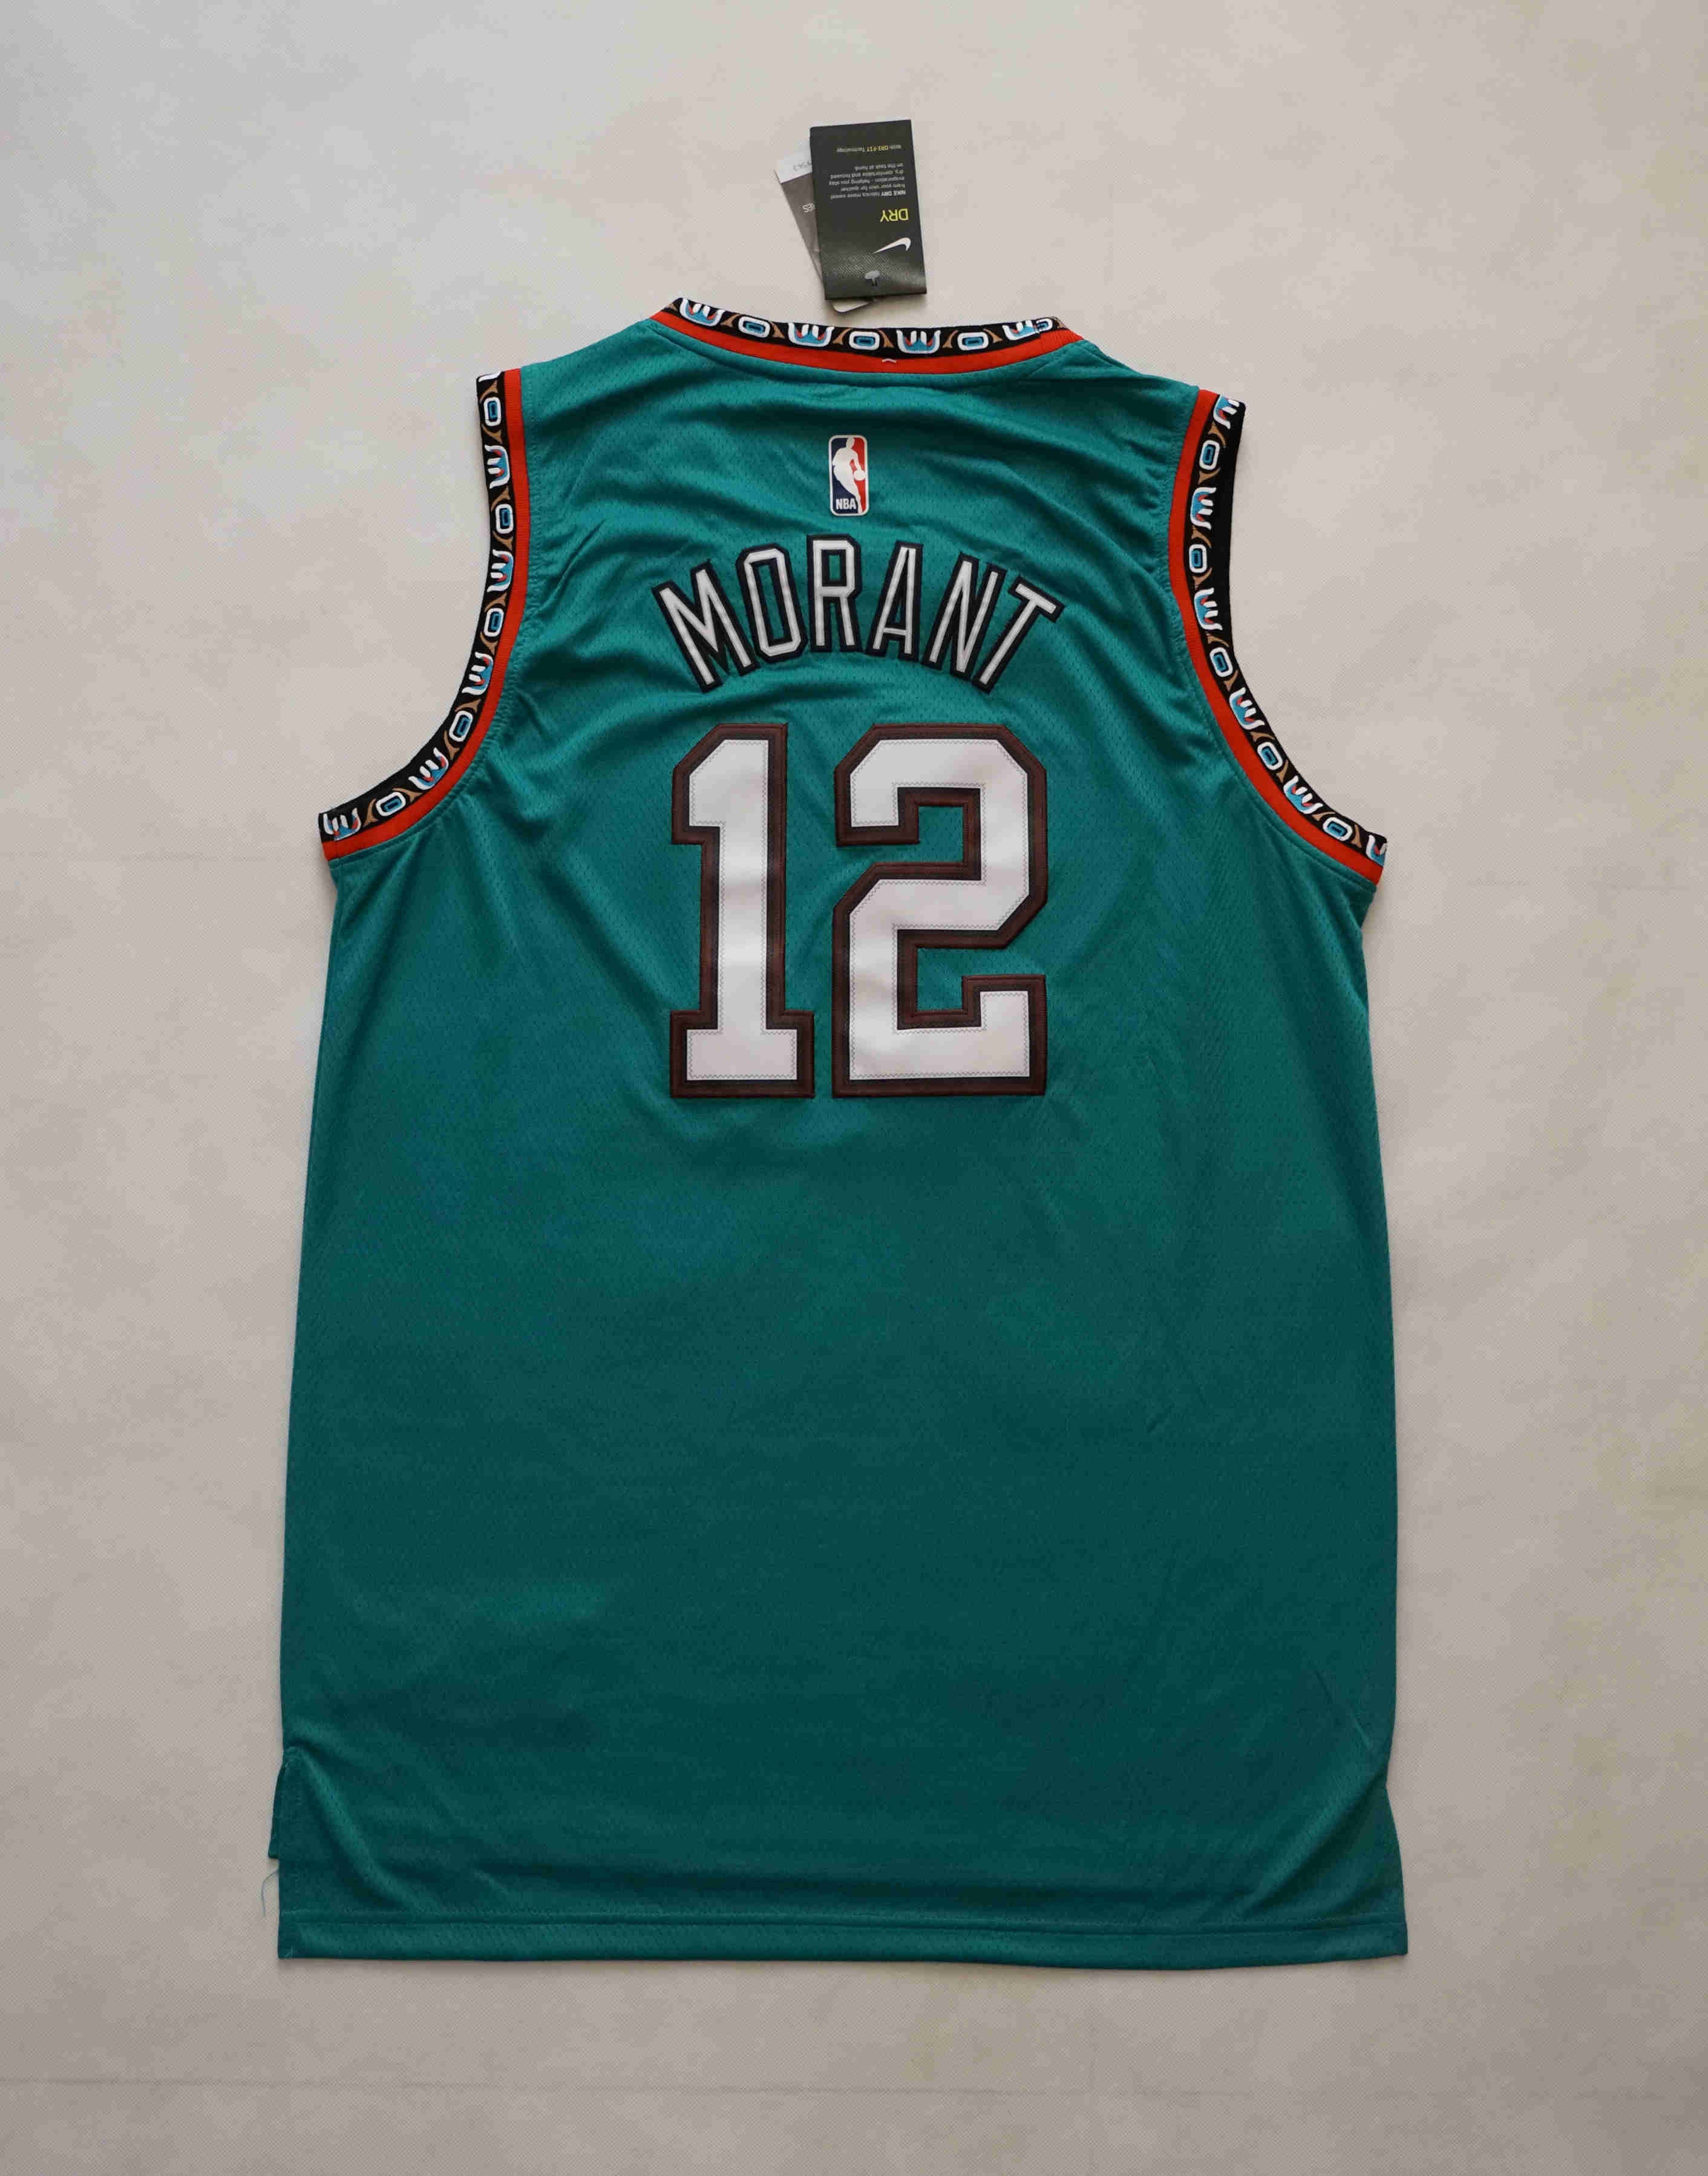 vancouver grizzlies throwback jersey